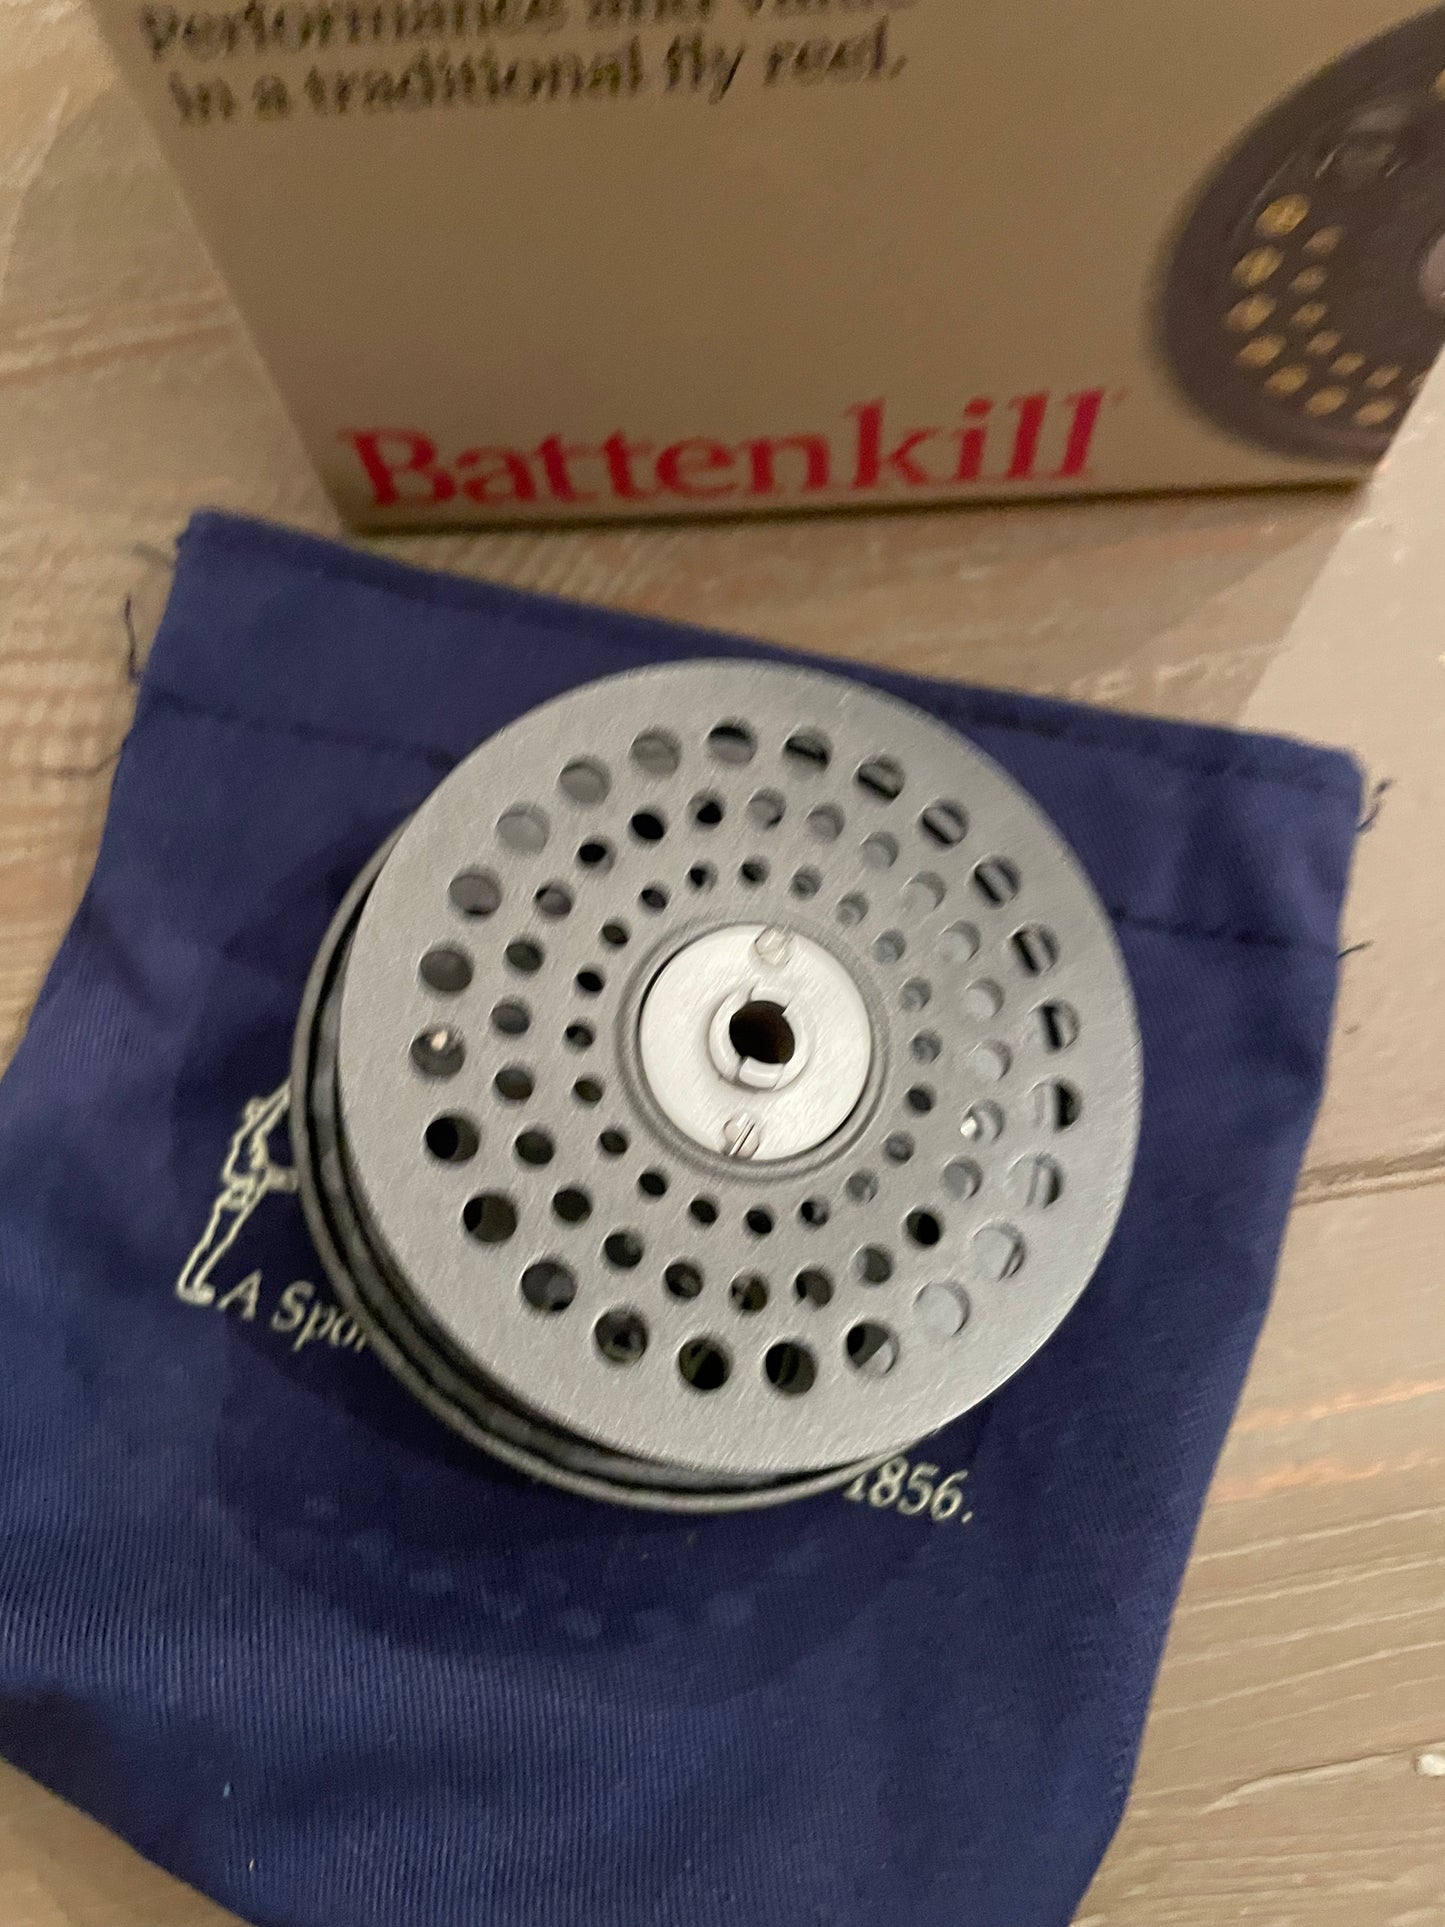 Orvis Battenkill Fly Reel Extra spool with box